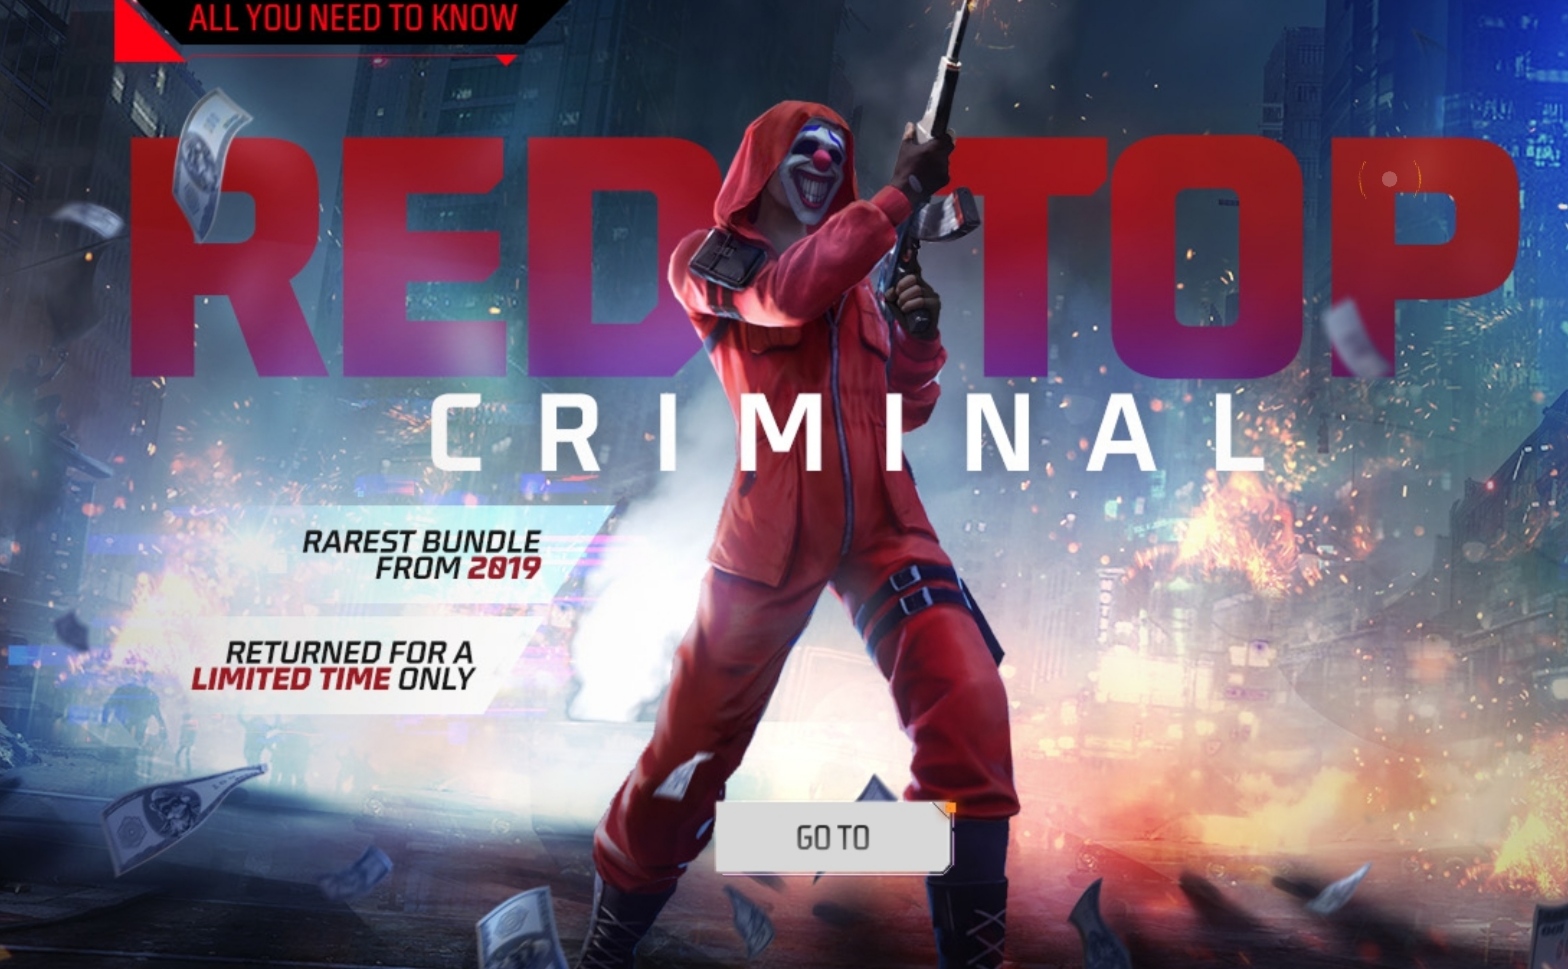 Free Fire MAX Top Criminal Event: Get exclusive bundles, emotes, grenade skin, motorbike, and more, all you need to know about the event and its rewards